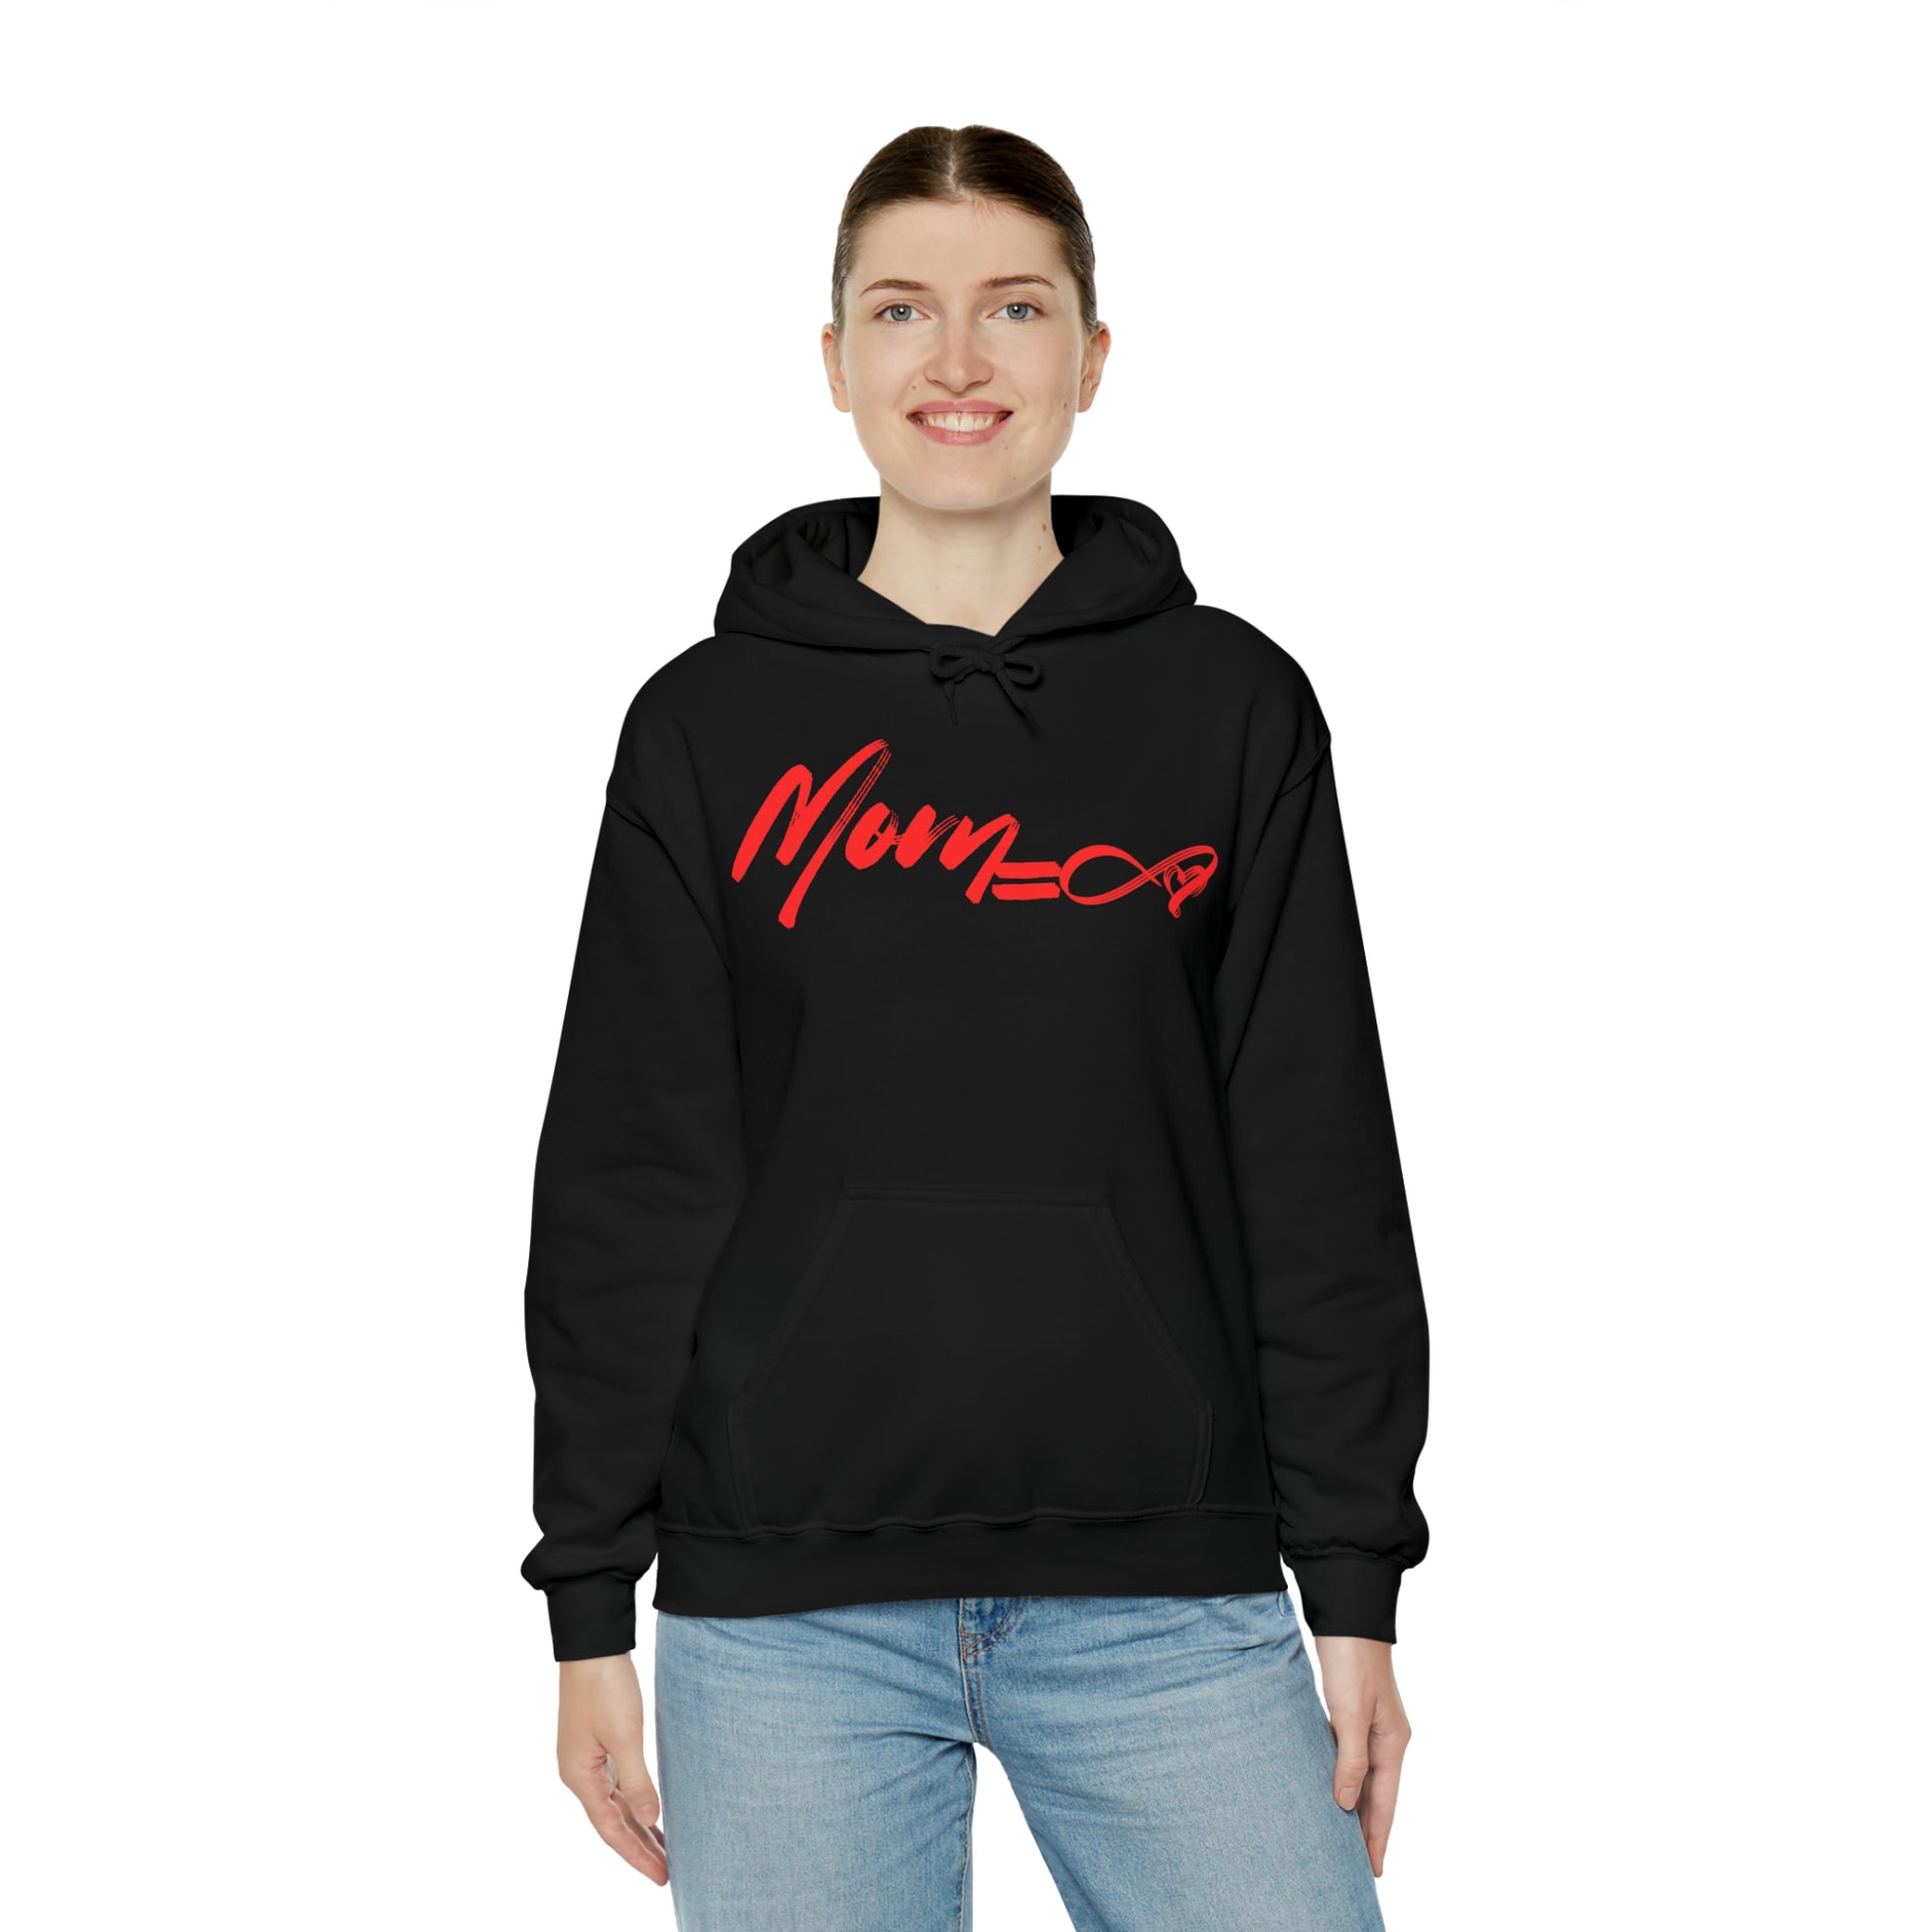 Unisex Heavy Blend Hooded Sweatshirt  Mothers Day Shirt, Mom Gift, Mothers Day Gift, Mama's  T-Shirt,  Mom Tee, Mother Gift, Gift from Son - owl2you